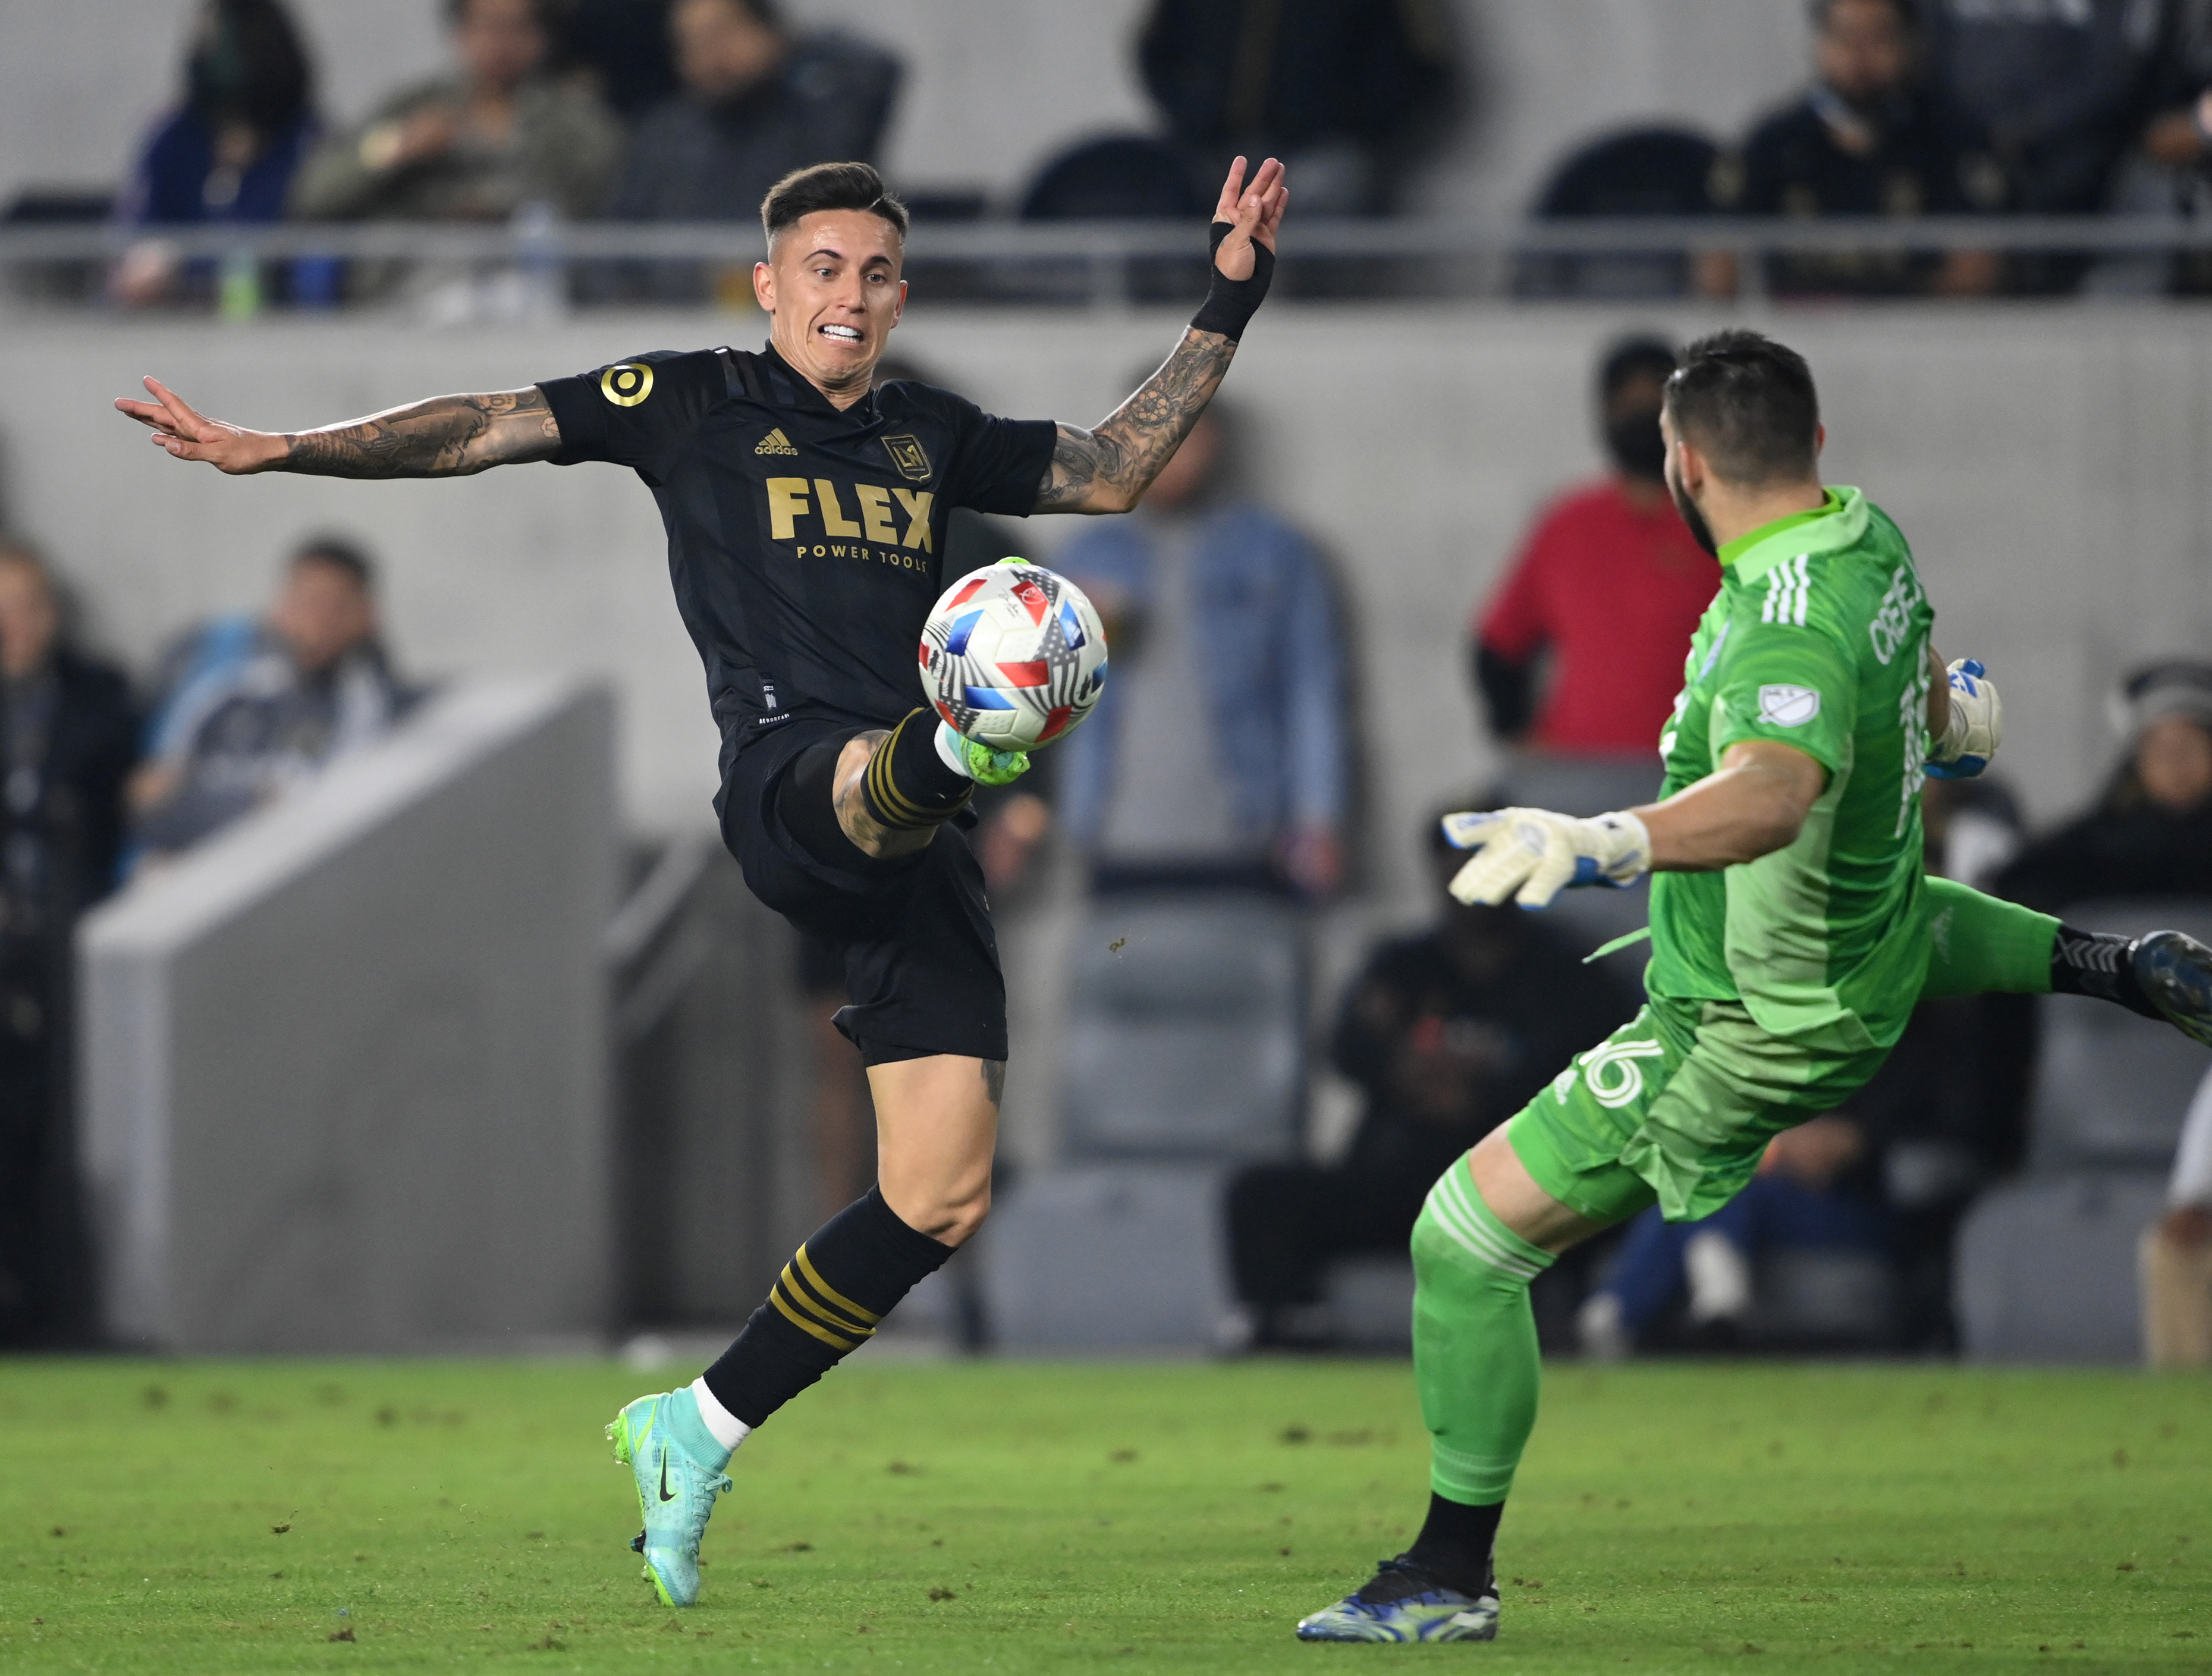 Brian Rodríguez was trained by Peñarol from Uruguay and transferred to LAFC in 2019 (Photo: Jayne Kamin-Oncea/REUTERS)